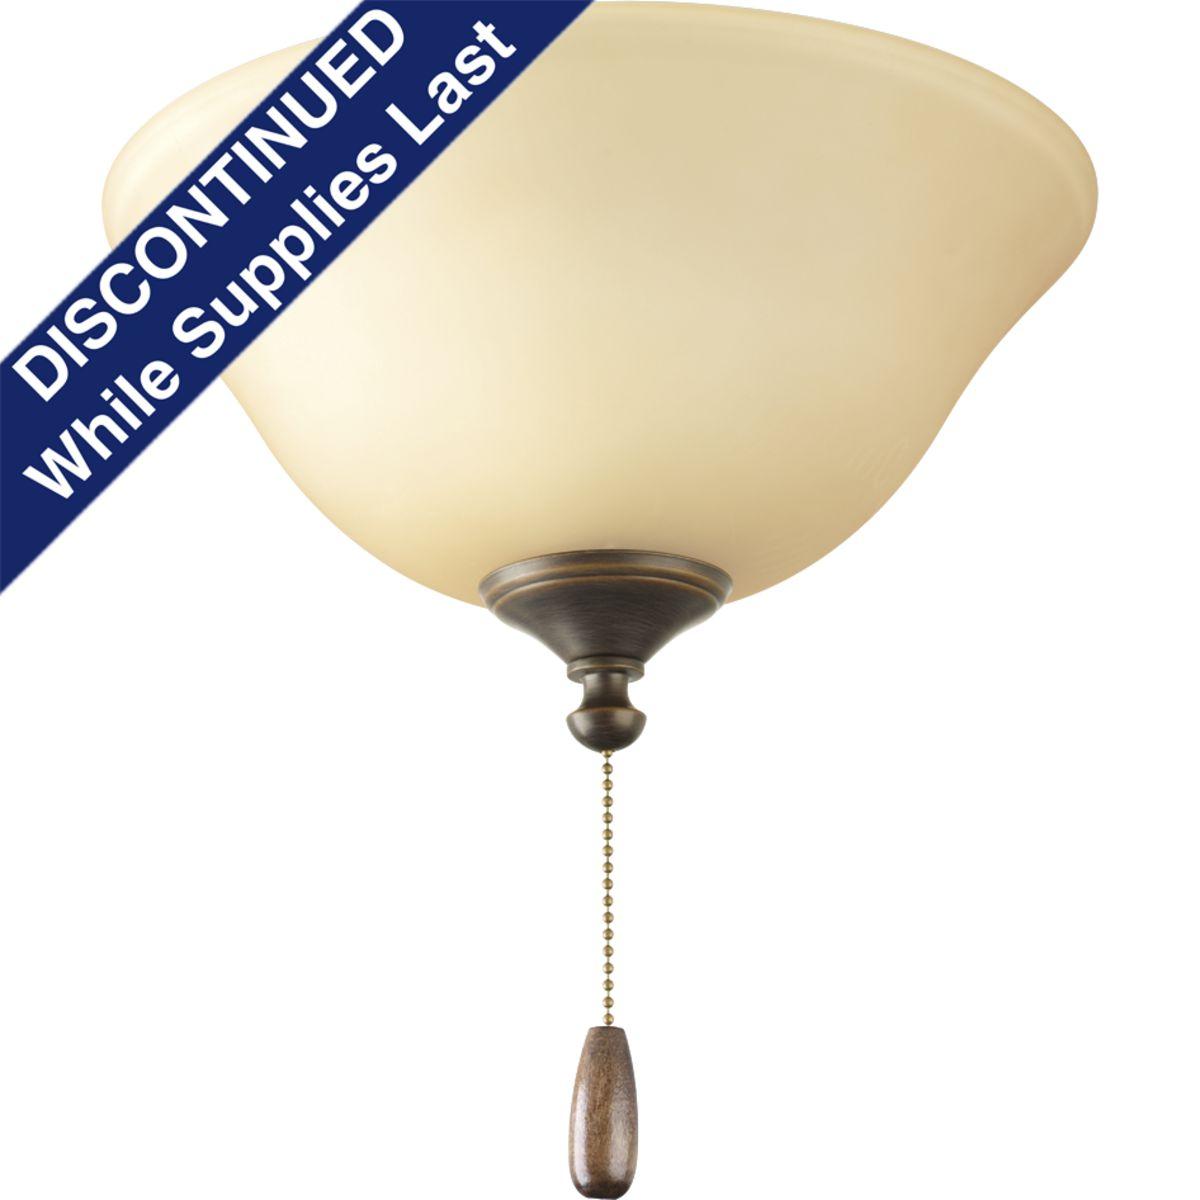 Hubbell P2612-20T Antique Bronze three-light fan kit with etched Light Umber glass bowl. Elegant light umber glass conceals light bulbs and casts an inviting illumination in any size room. Corresponding pull chain features Antique Brass finish with a medium oak fob. Univer